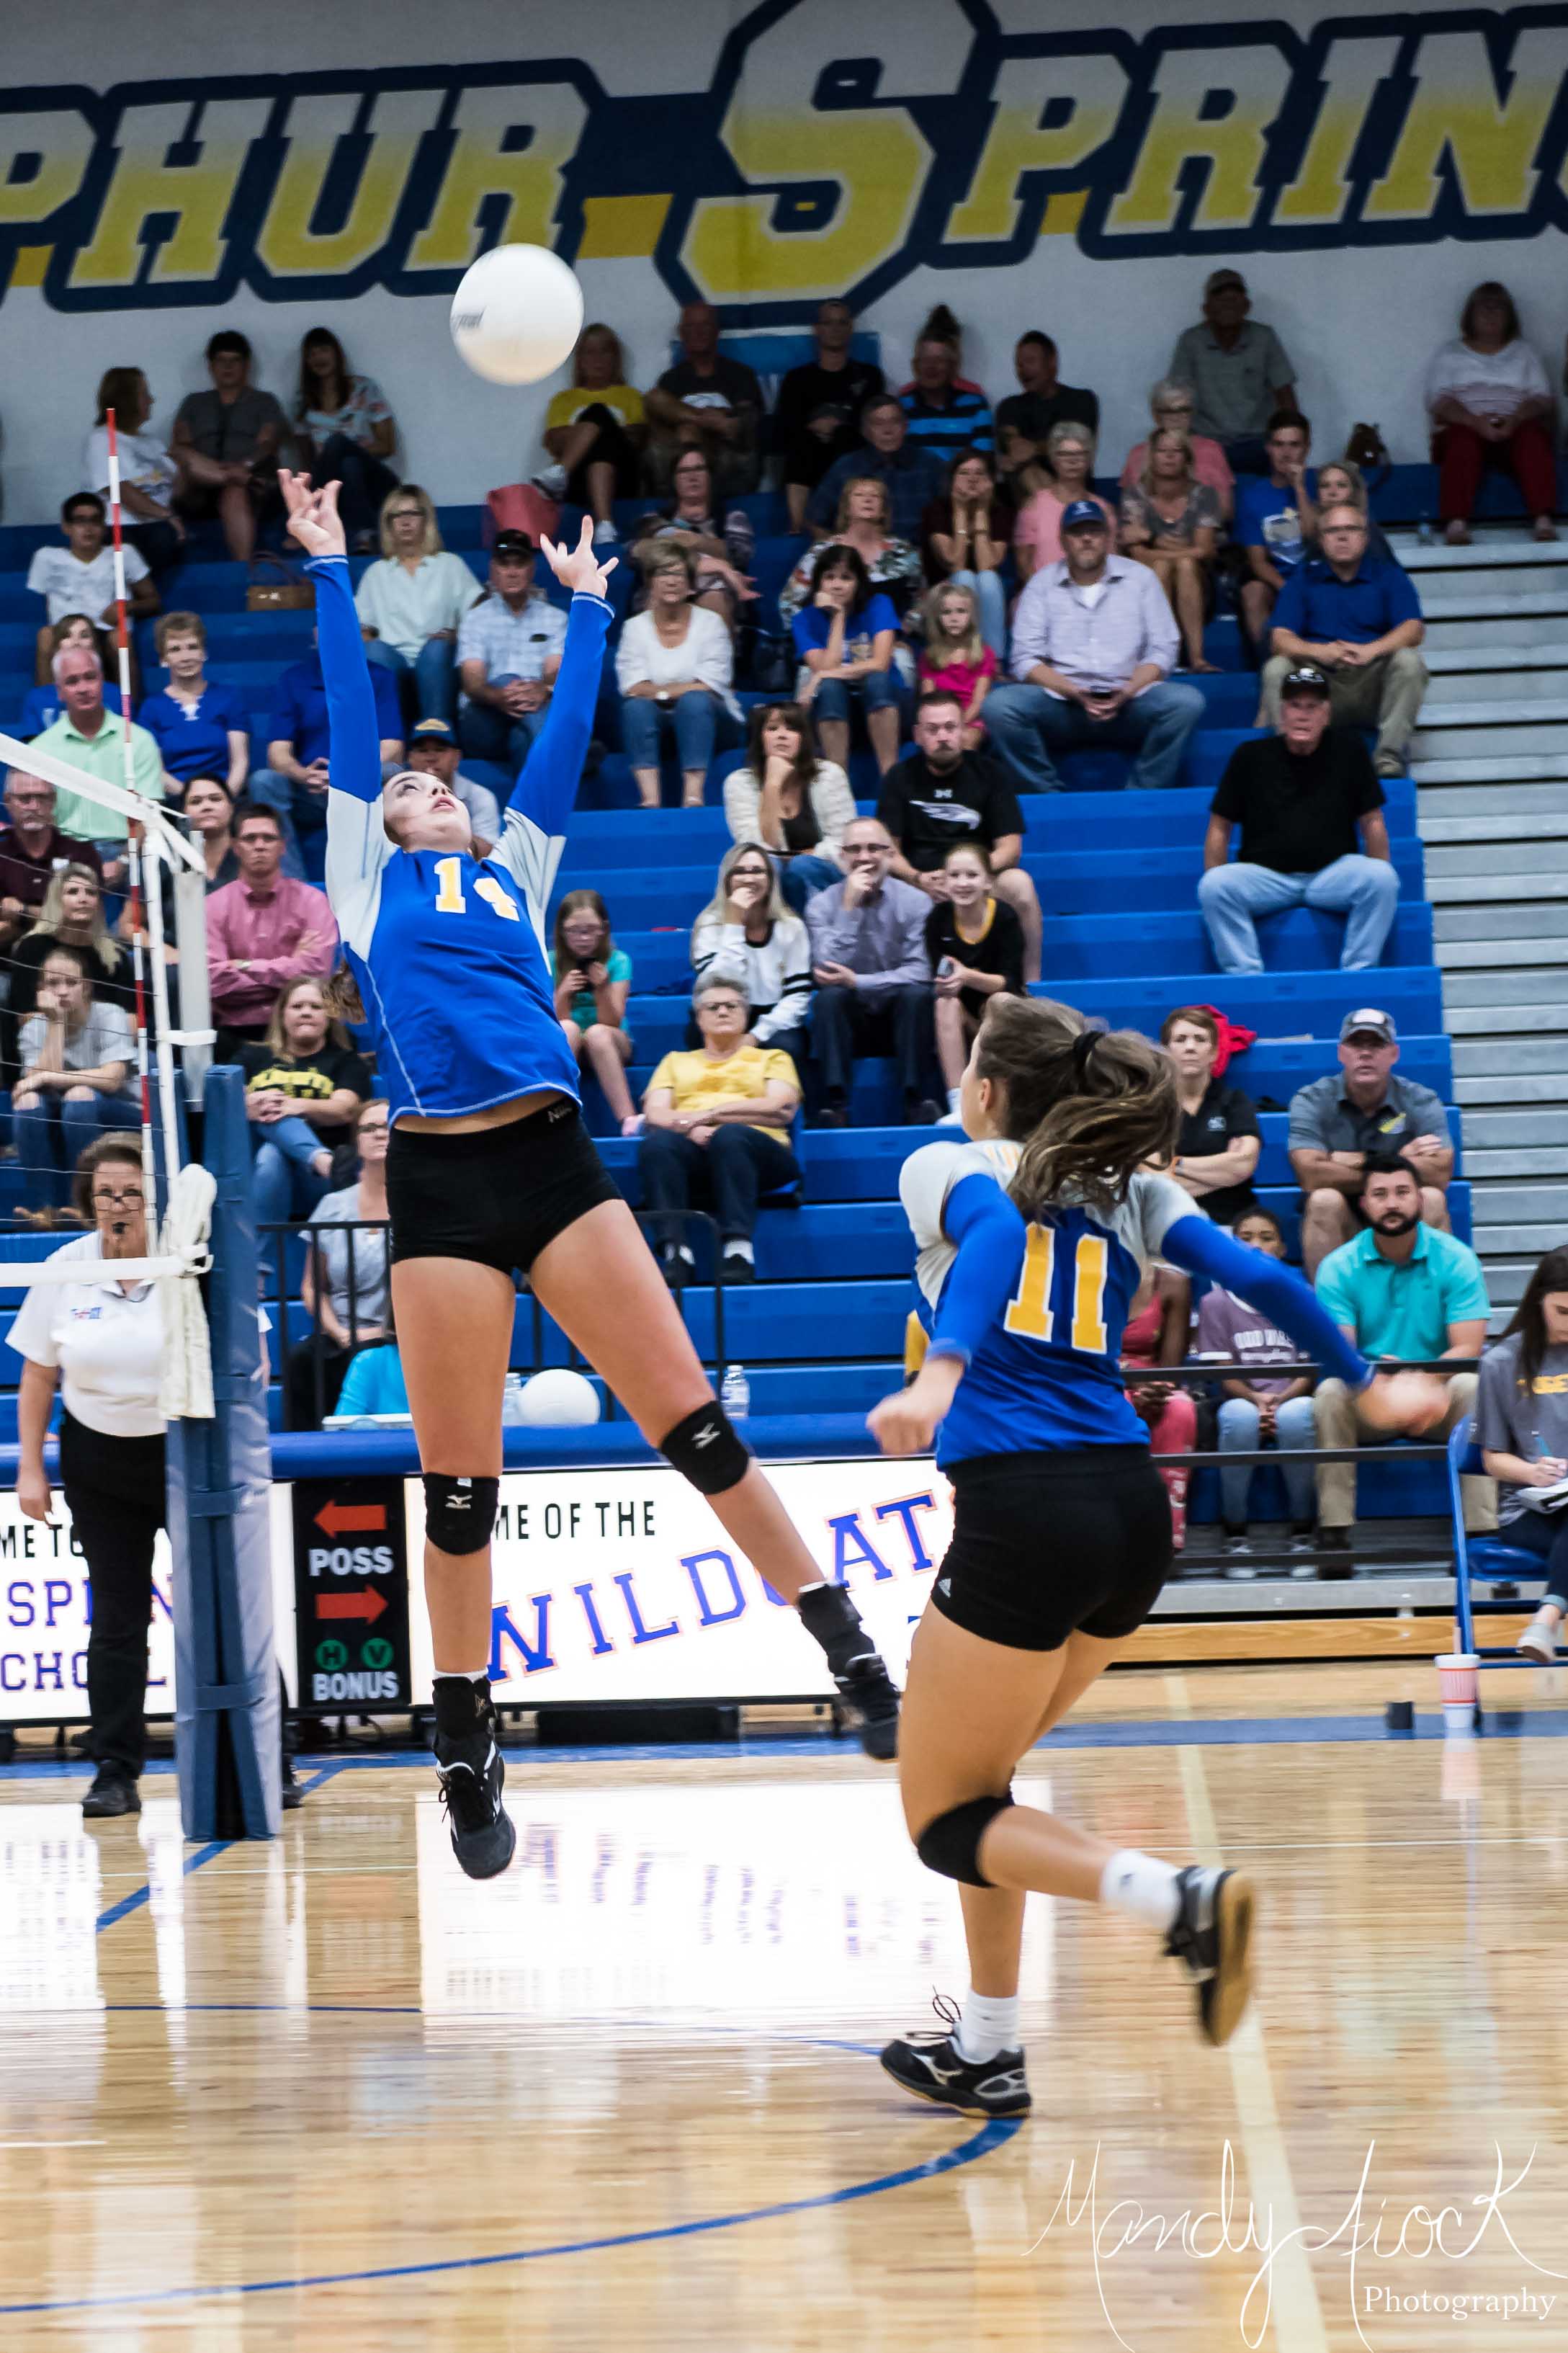 Photos of the JV and Varsity Sulphur Springs Volleyball teams by Mandy Fiock Photography!